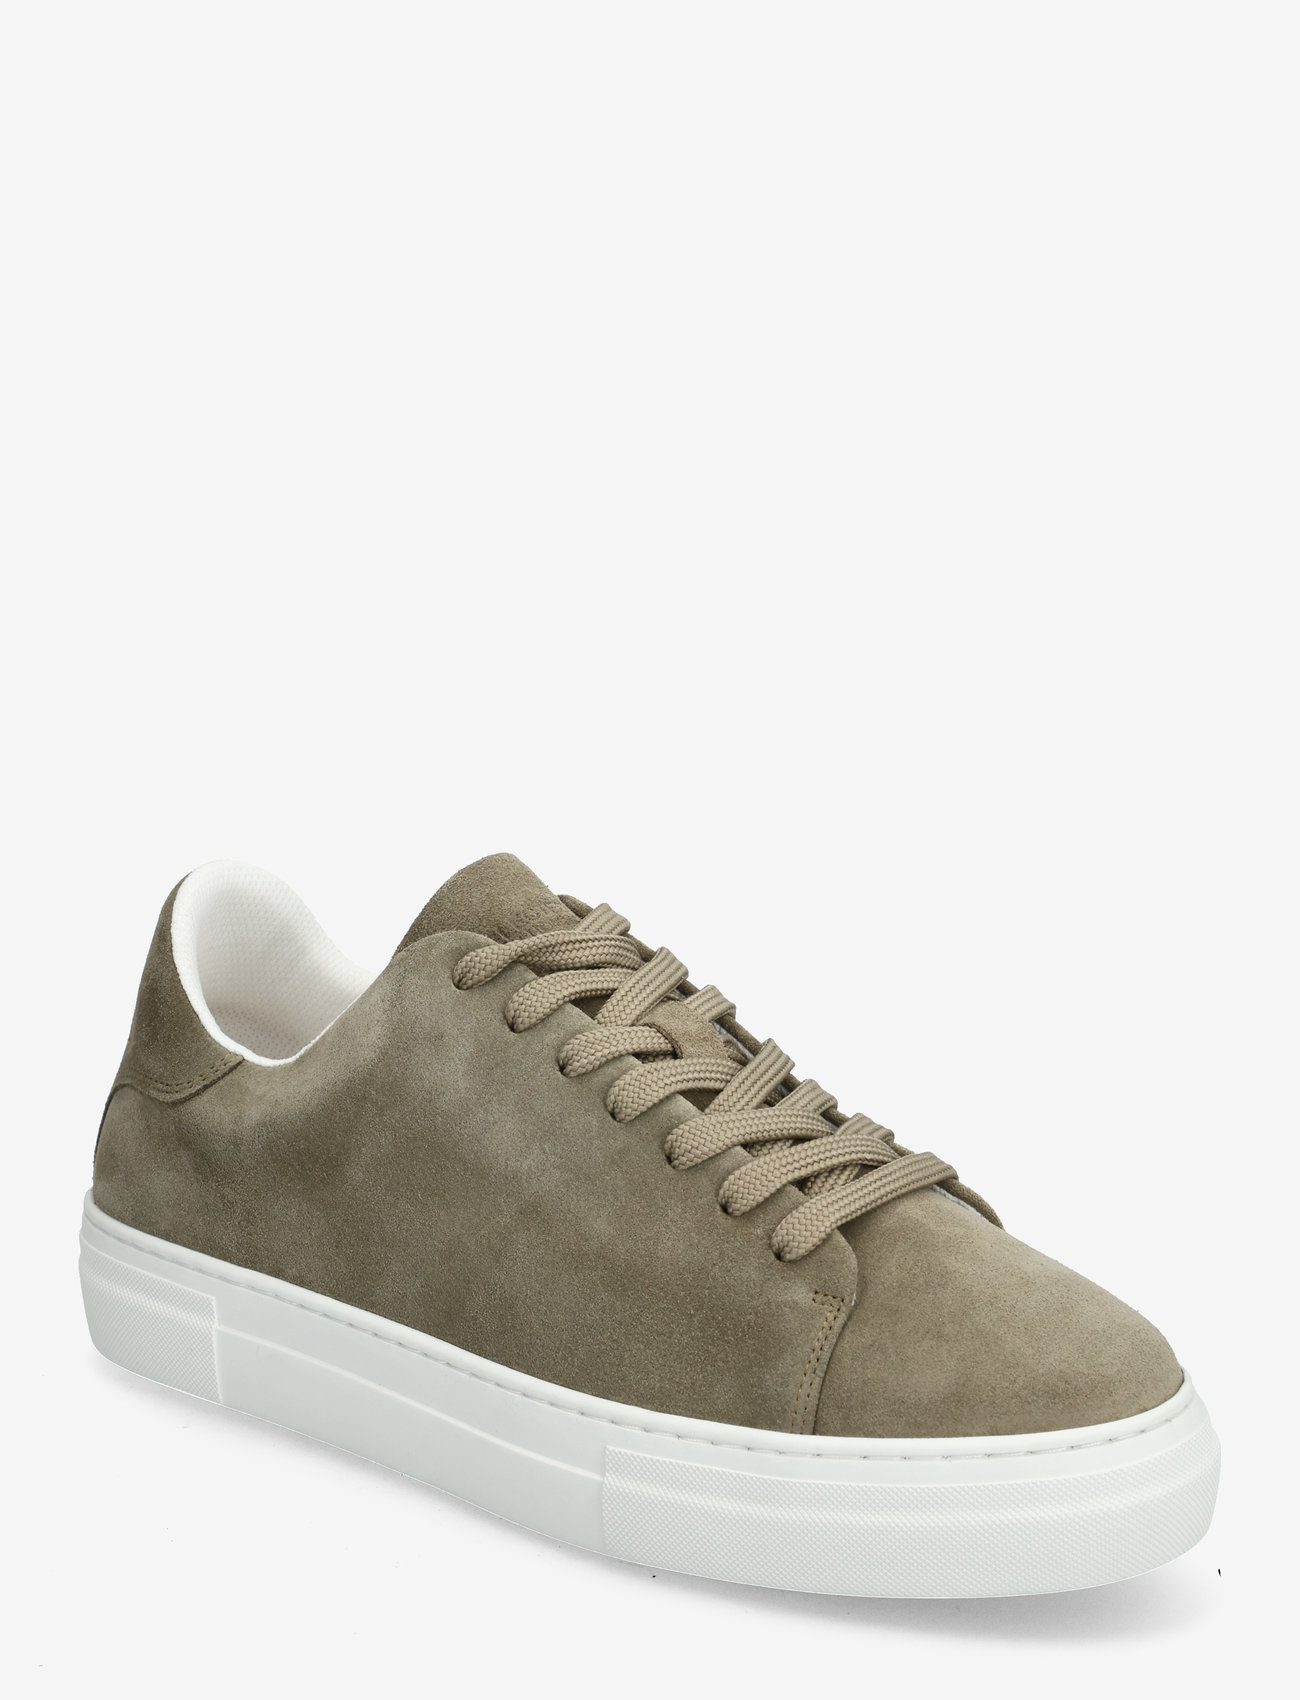 Selected Homme - SLHDAVID CHUNKY CLEAN SUEDE TRAINER B - lav ankel - grape leaf - 0